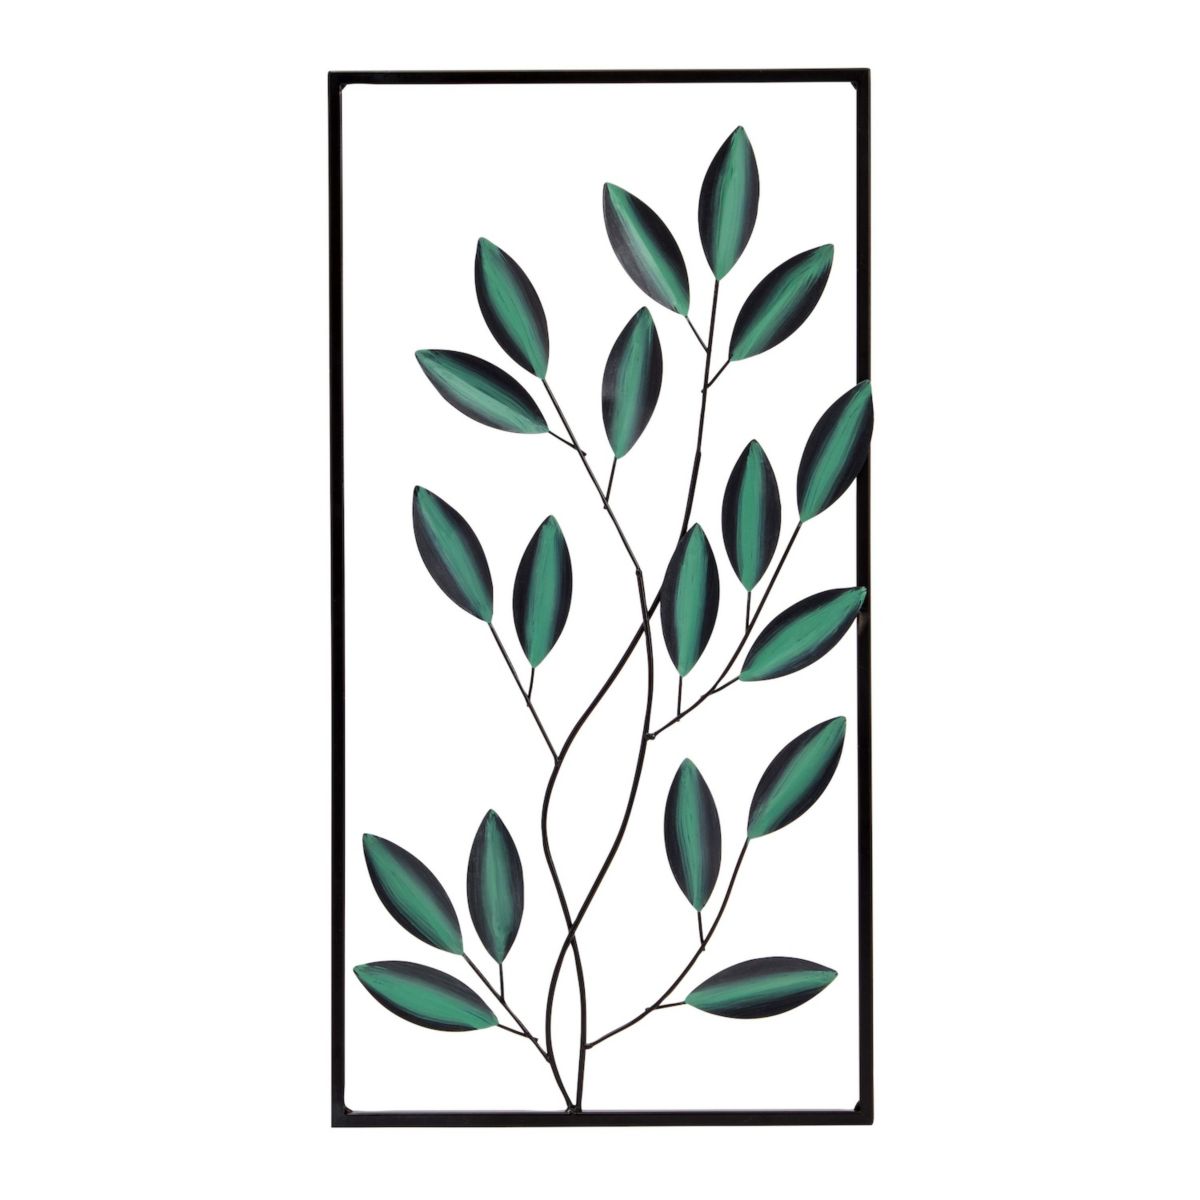 Metal Leaf Wall Decor for Living Room, Wall Art for Gifts, Wedding, Housewarming 12 x 23.6 In Juvale